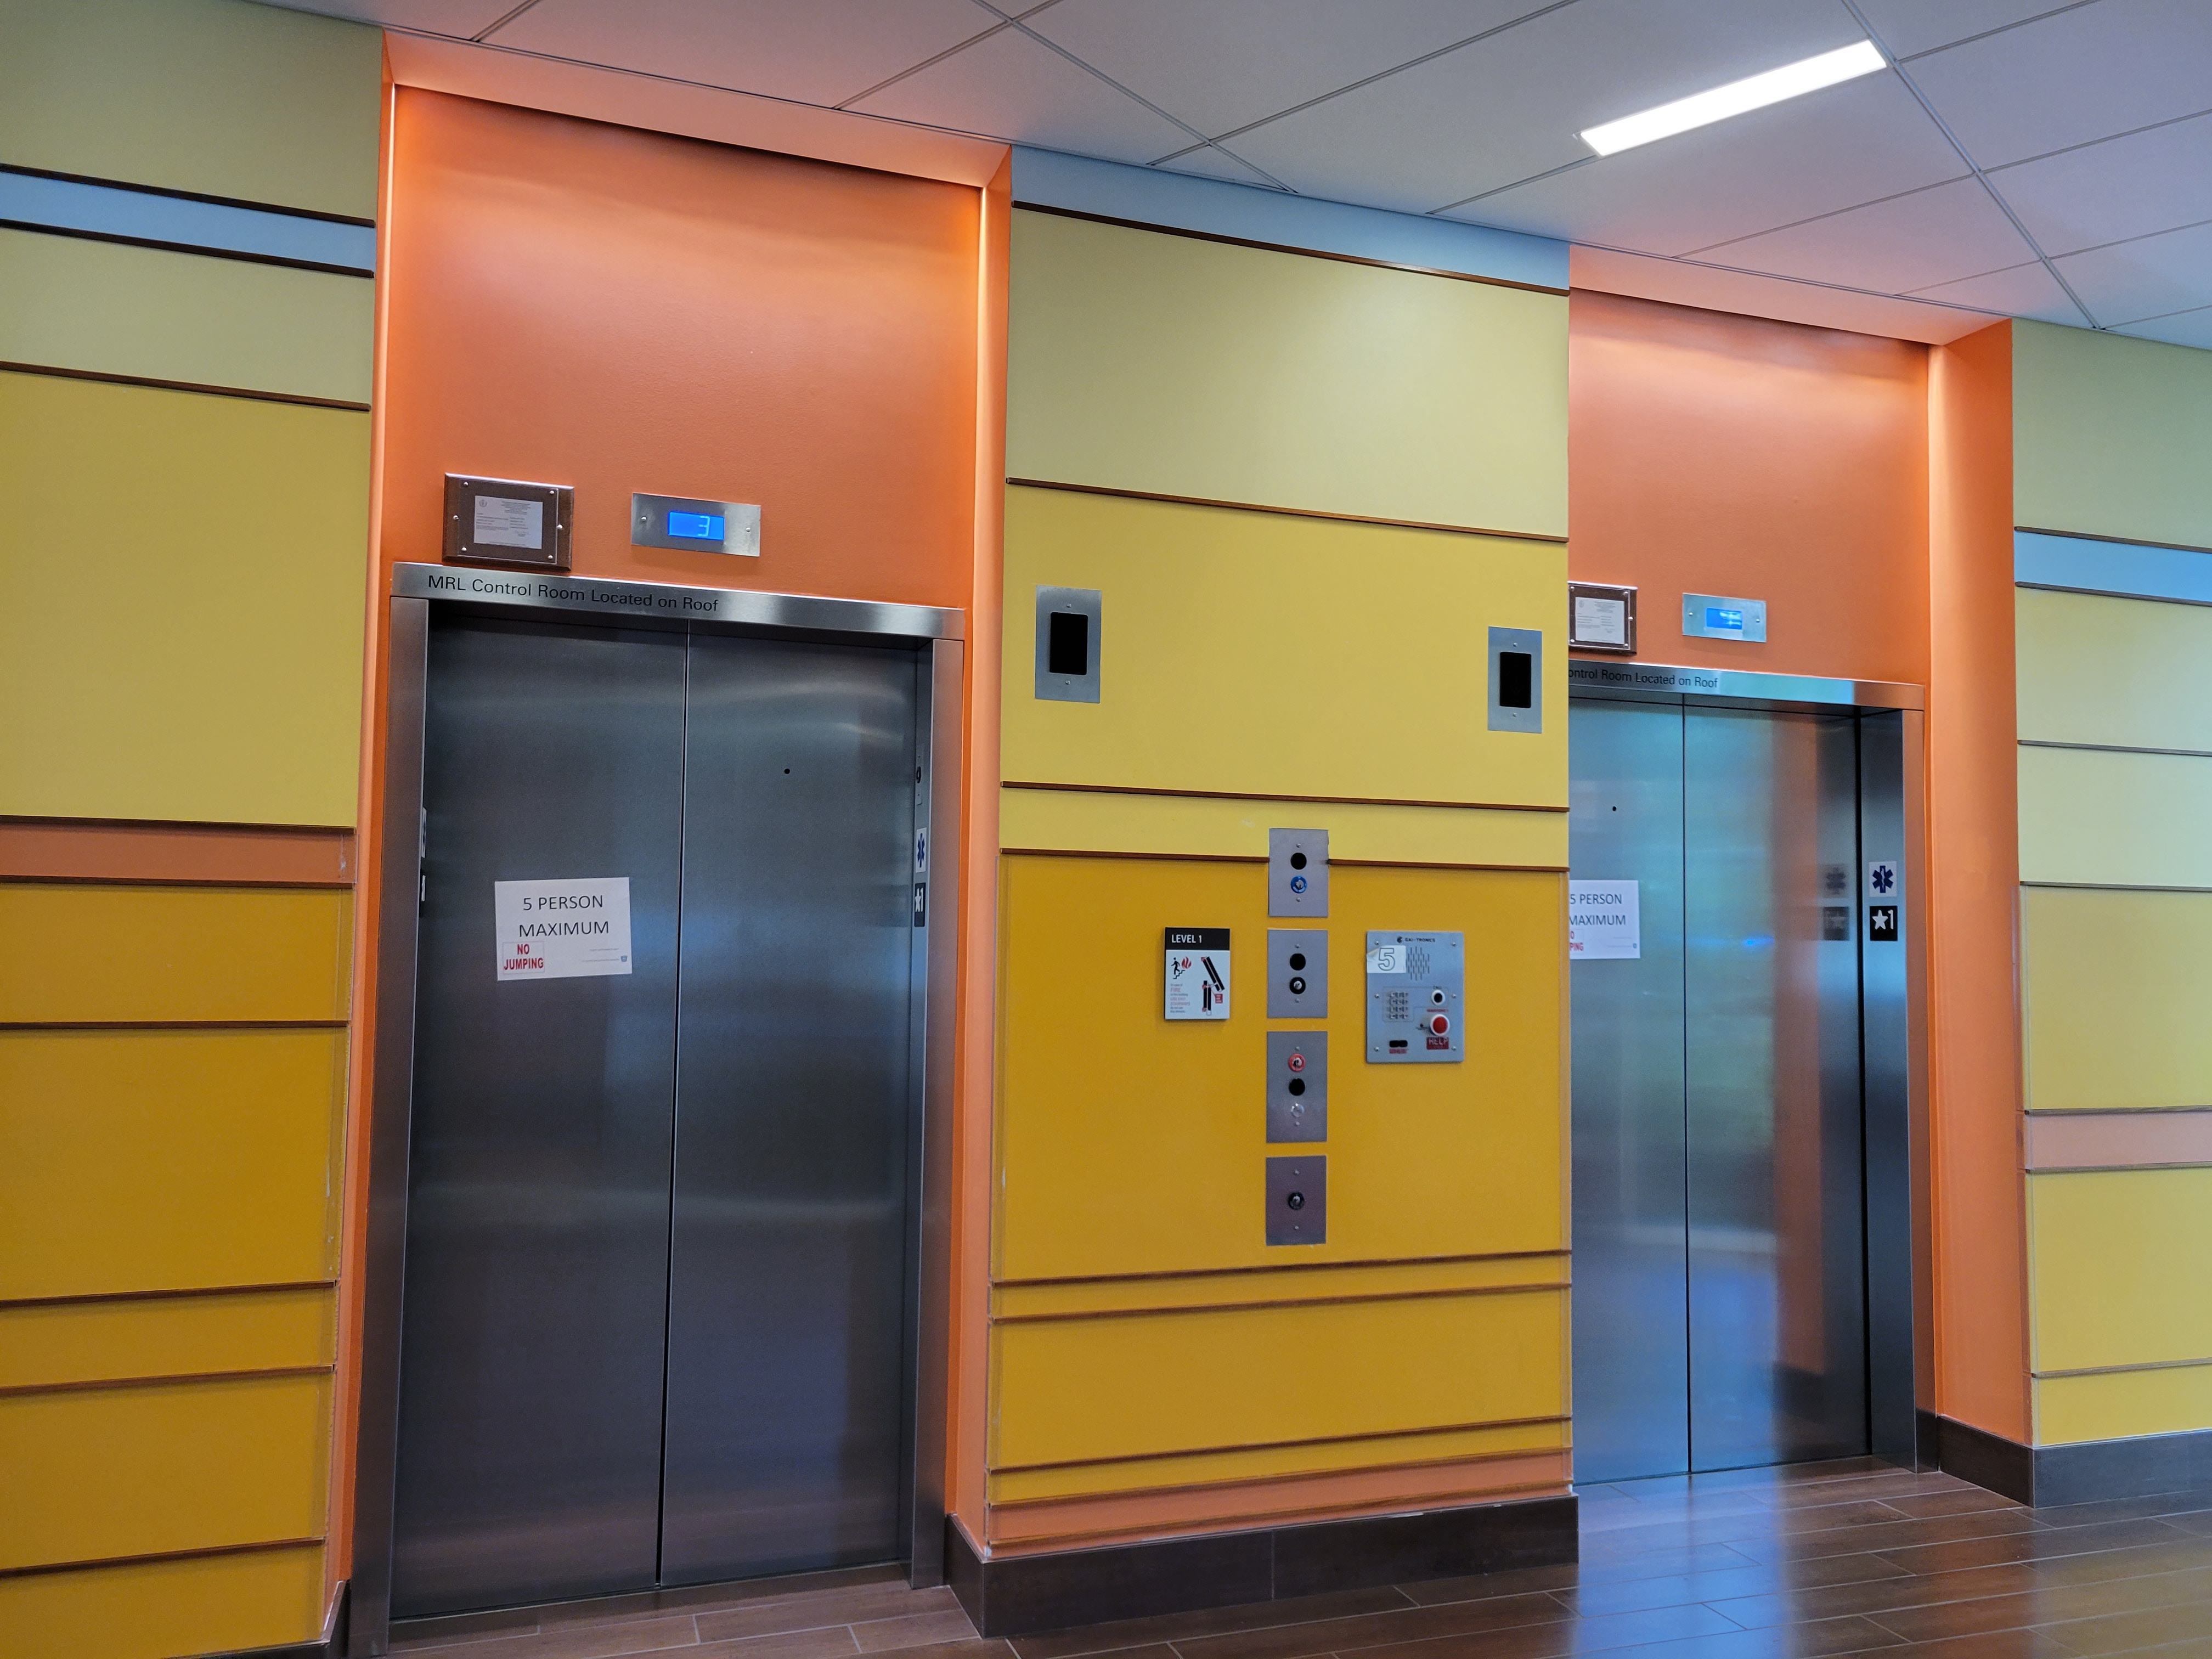 The two University Hall elevators used to transport students to and from the main lobby have been mired in mechanical problems, particularly the one to the left. The elevators are now seen sporting signs indicating that a maximum of five people can use the elevator at any one time.